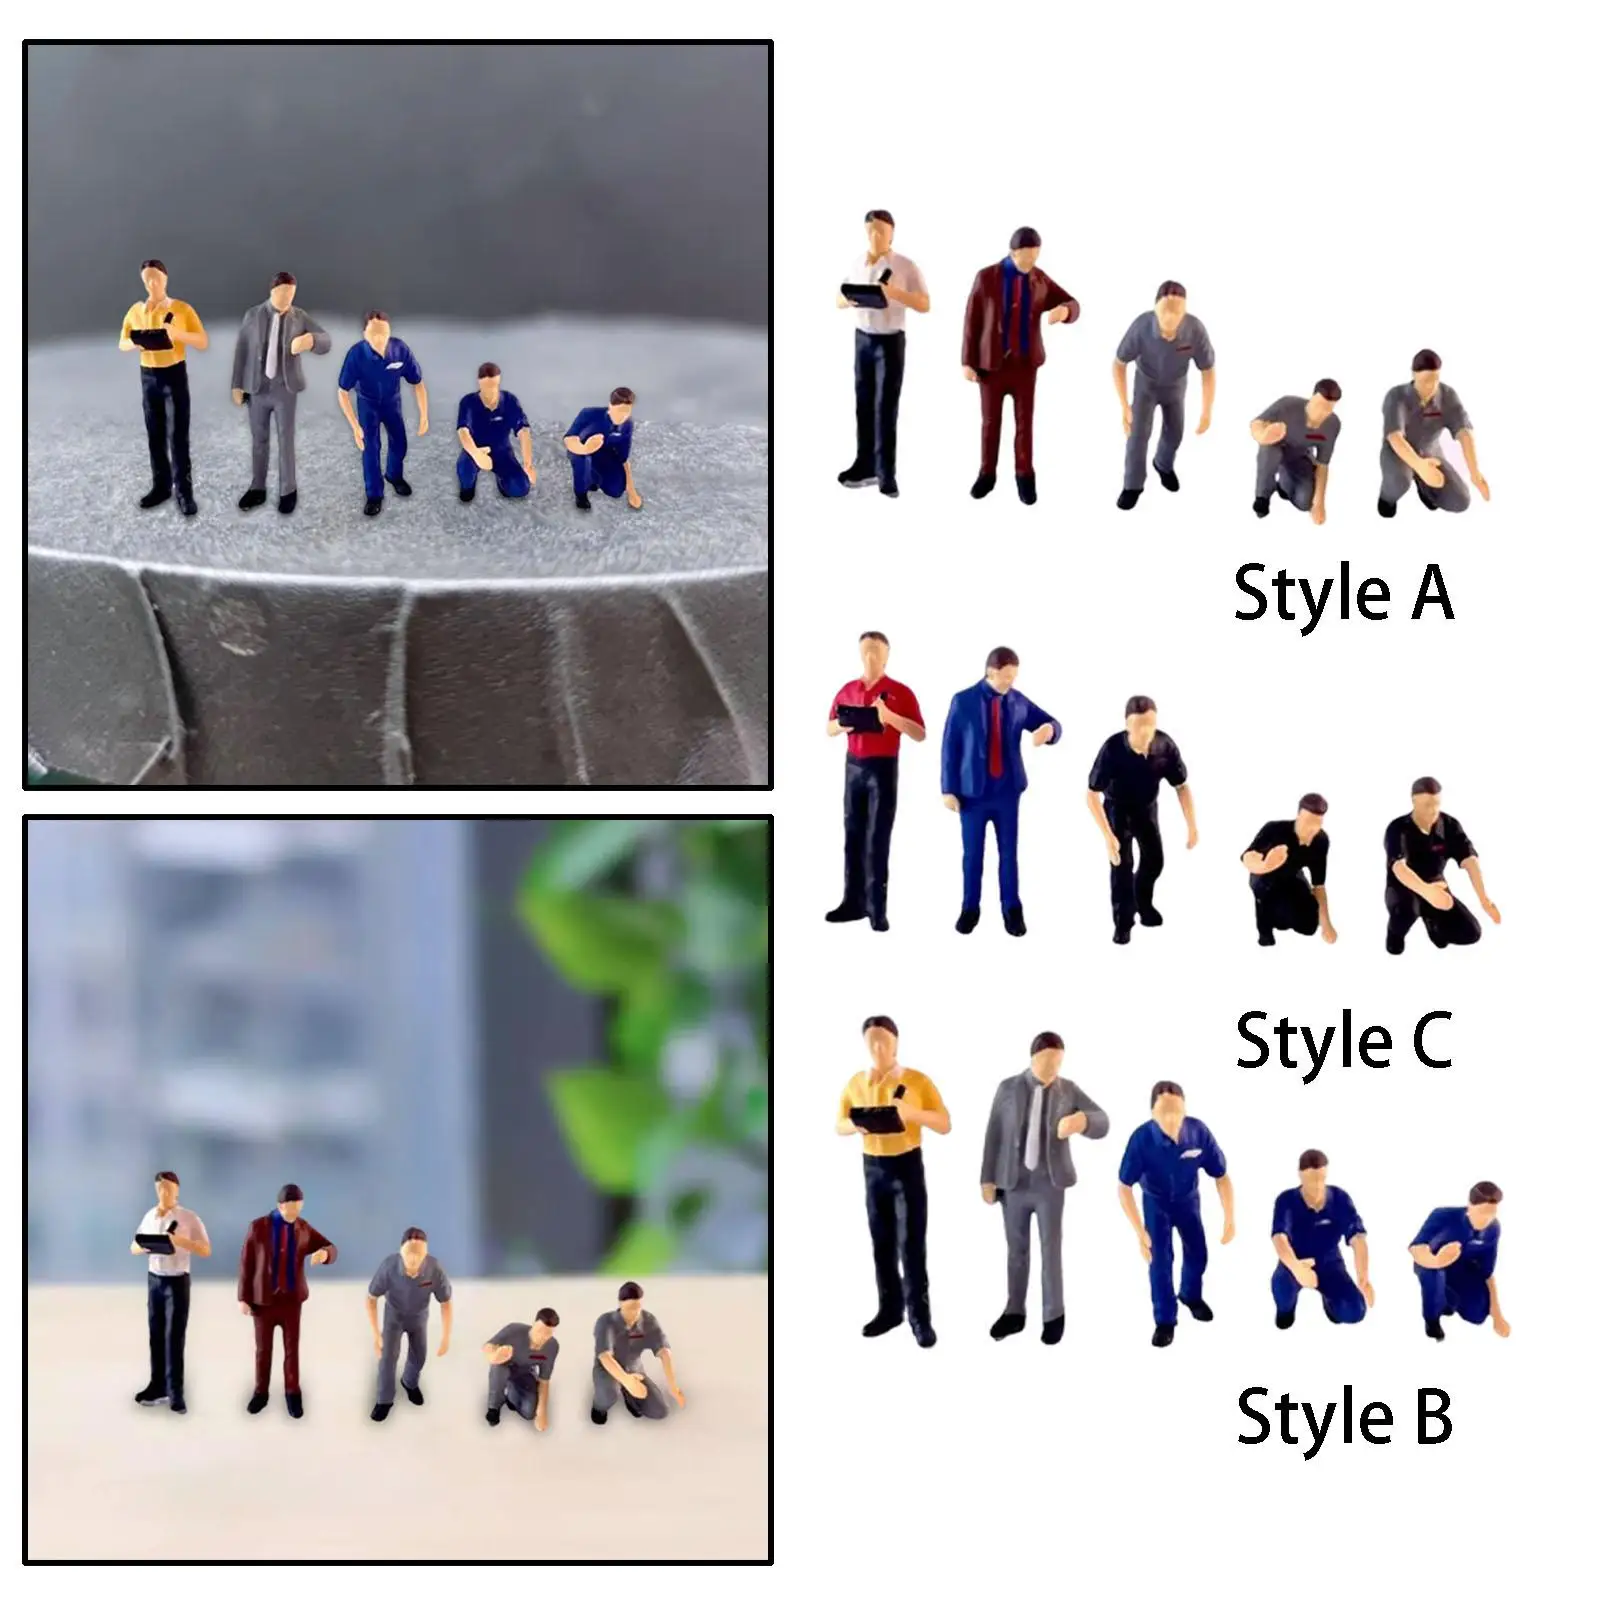 5x 1/64 Scale Diorama Figures Hobby Street People Model for Railway Sets Doll House Decoration Model Building Kits Adults Gifts